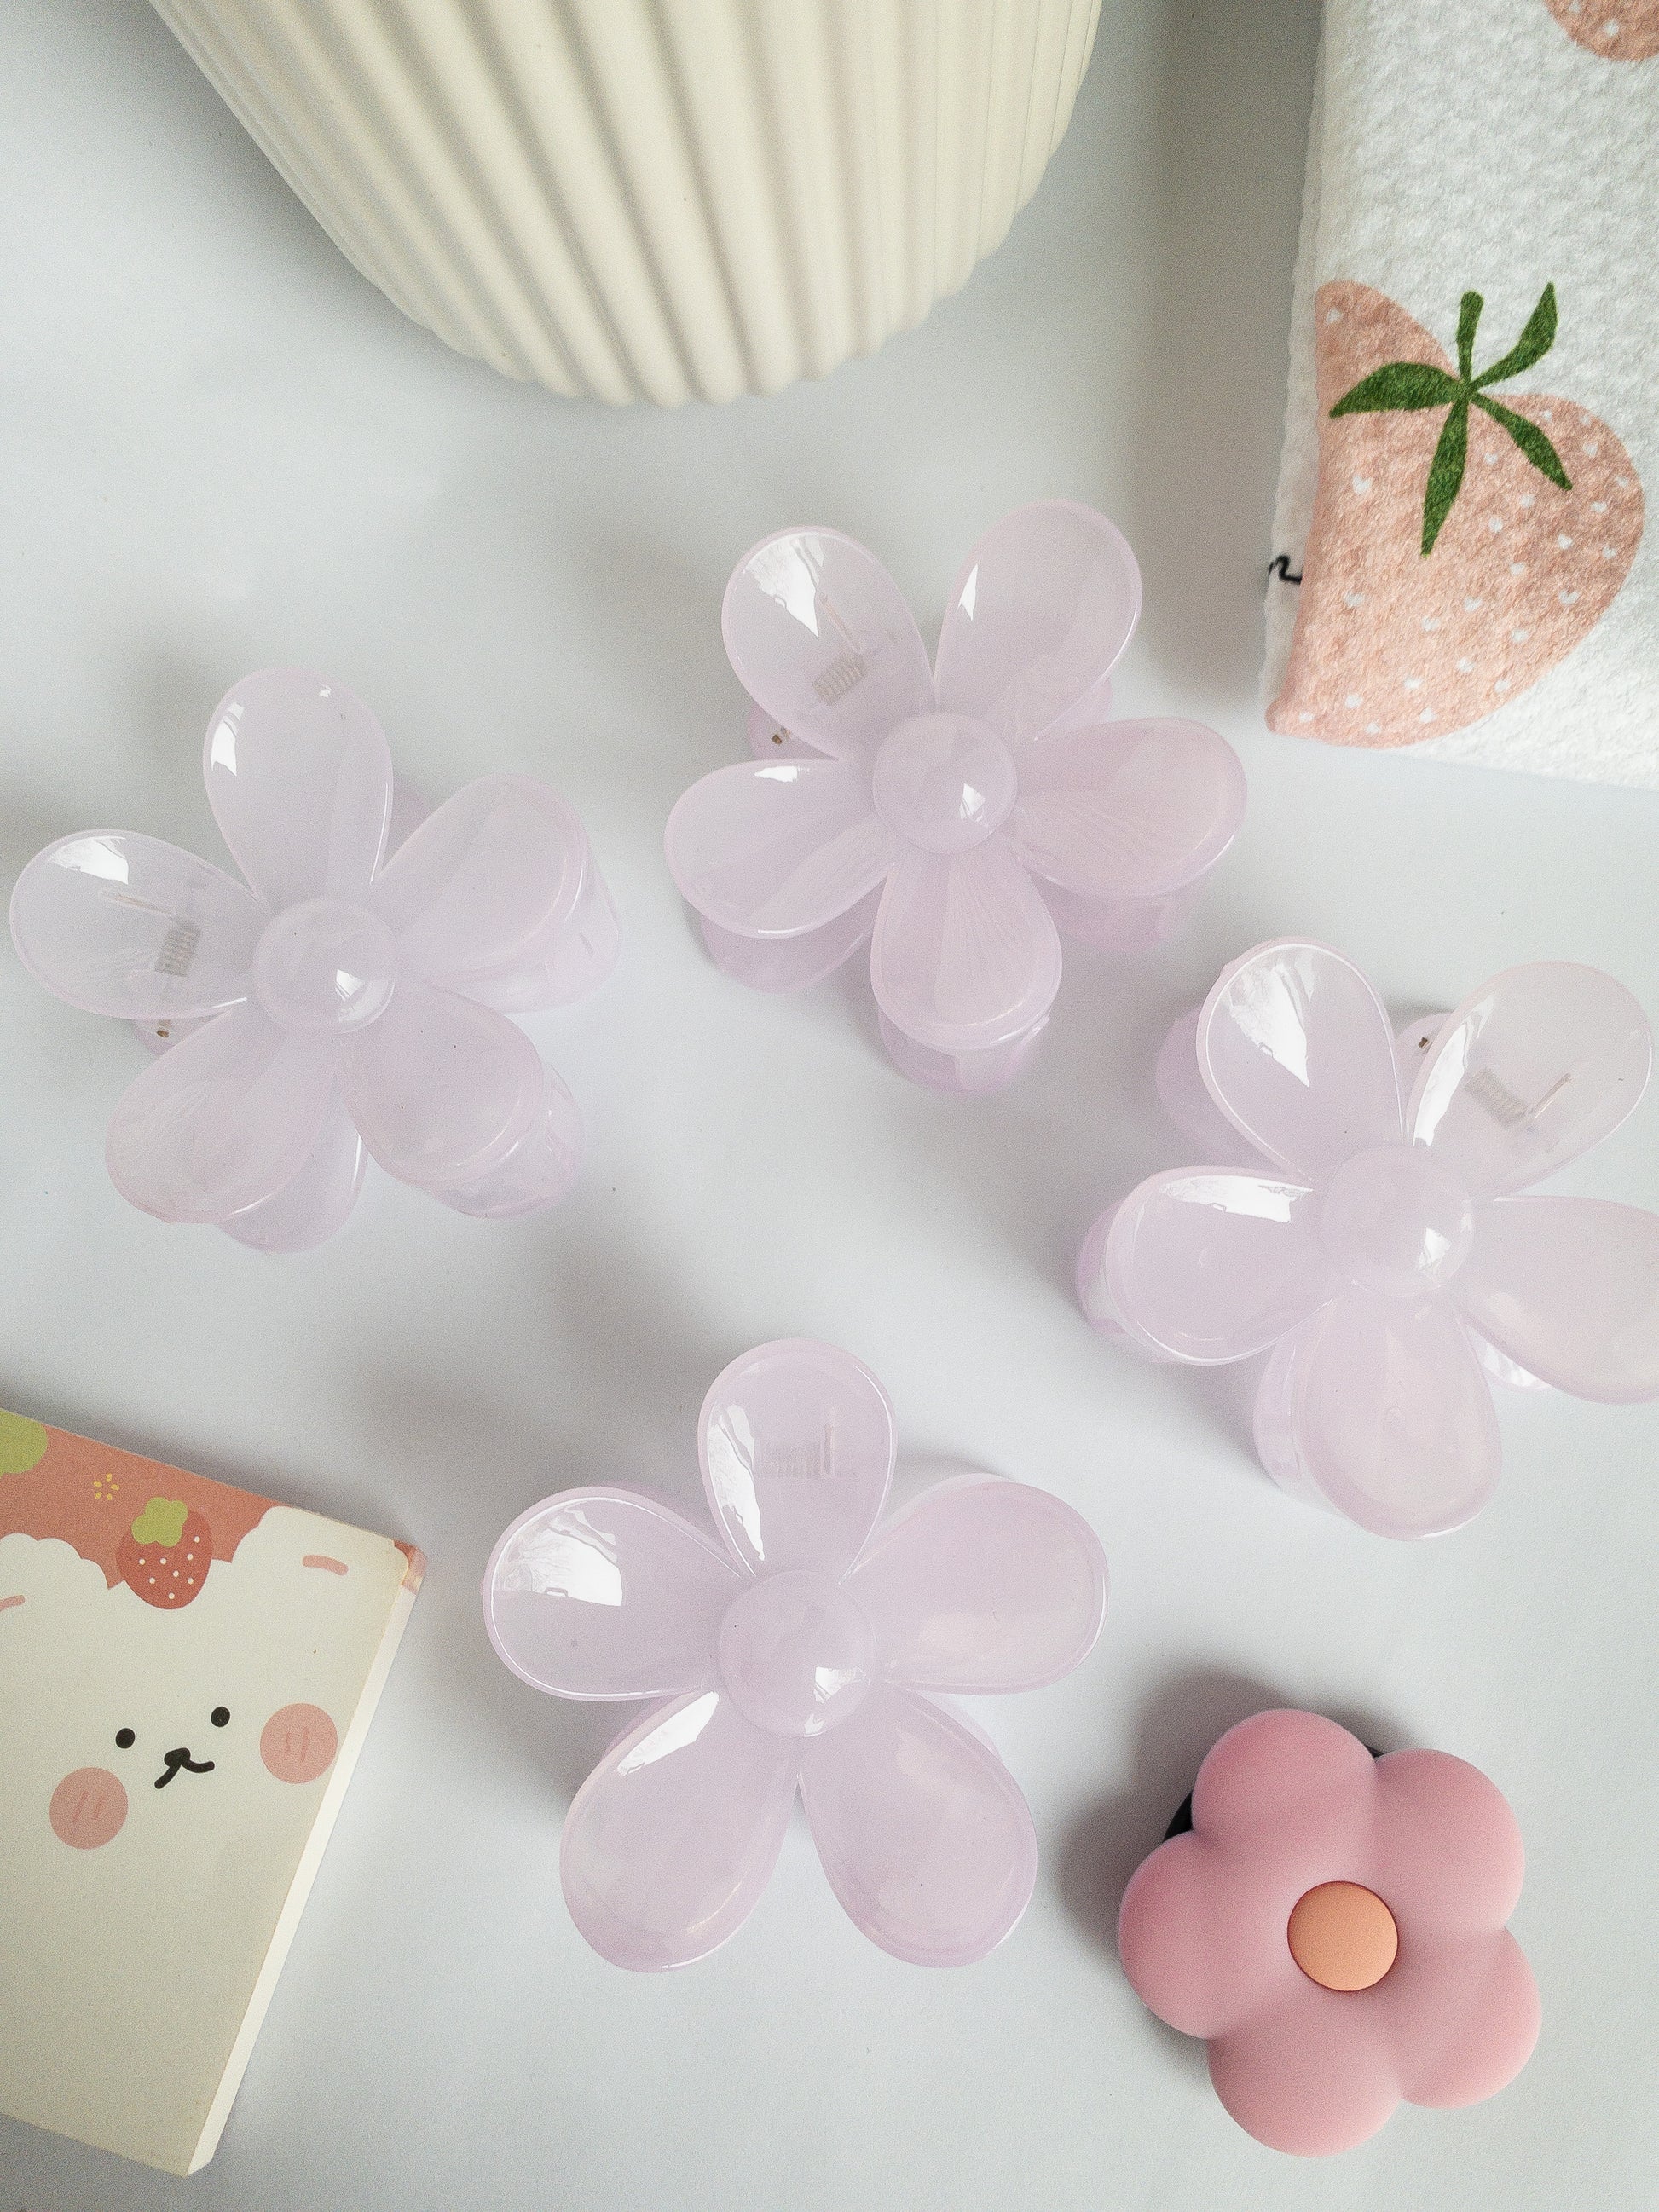 The prettiest yogurt jelly, ethereal flower hair claw! This hair claw is a medium size, great for half up styles or an updo. A beautifully subtle semi-translucent shade of macaron purple to primp up your hair.